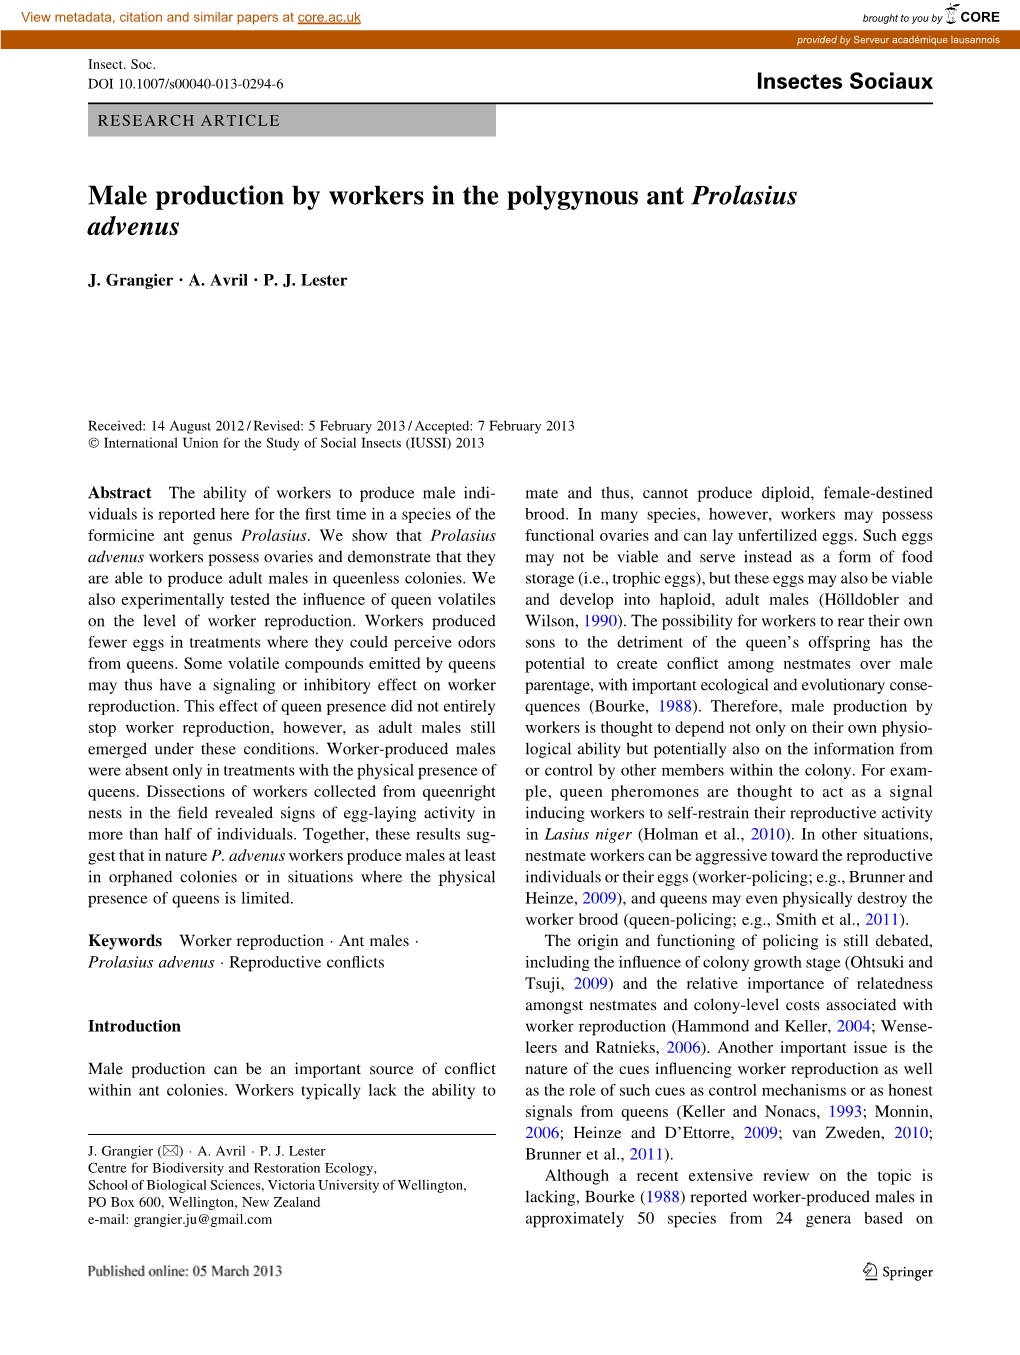 Male Production by Workers in the Polygynous Ant Prolasius Advenus